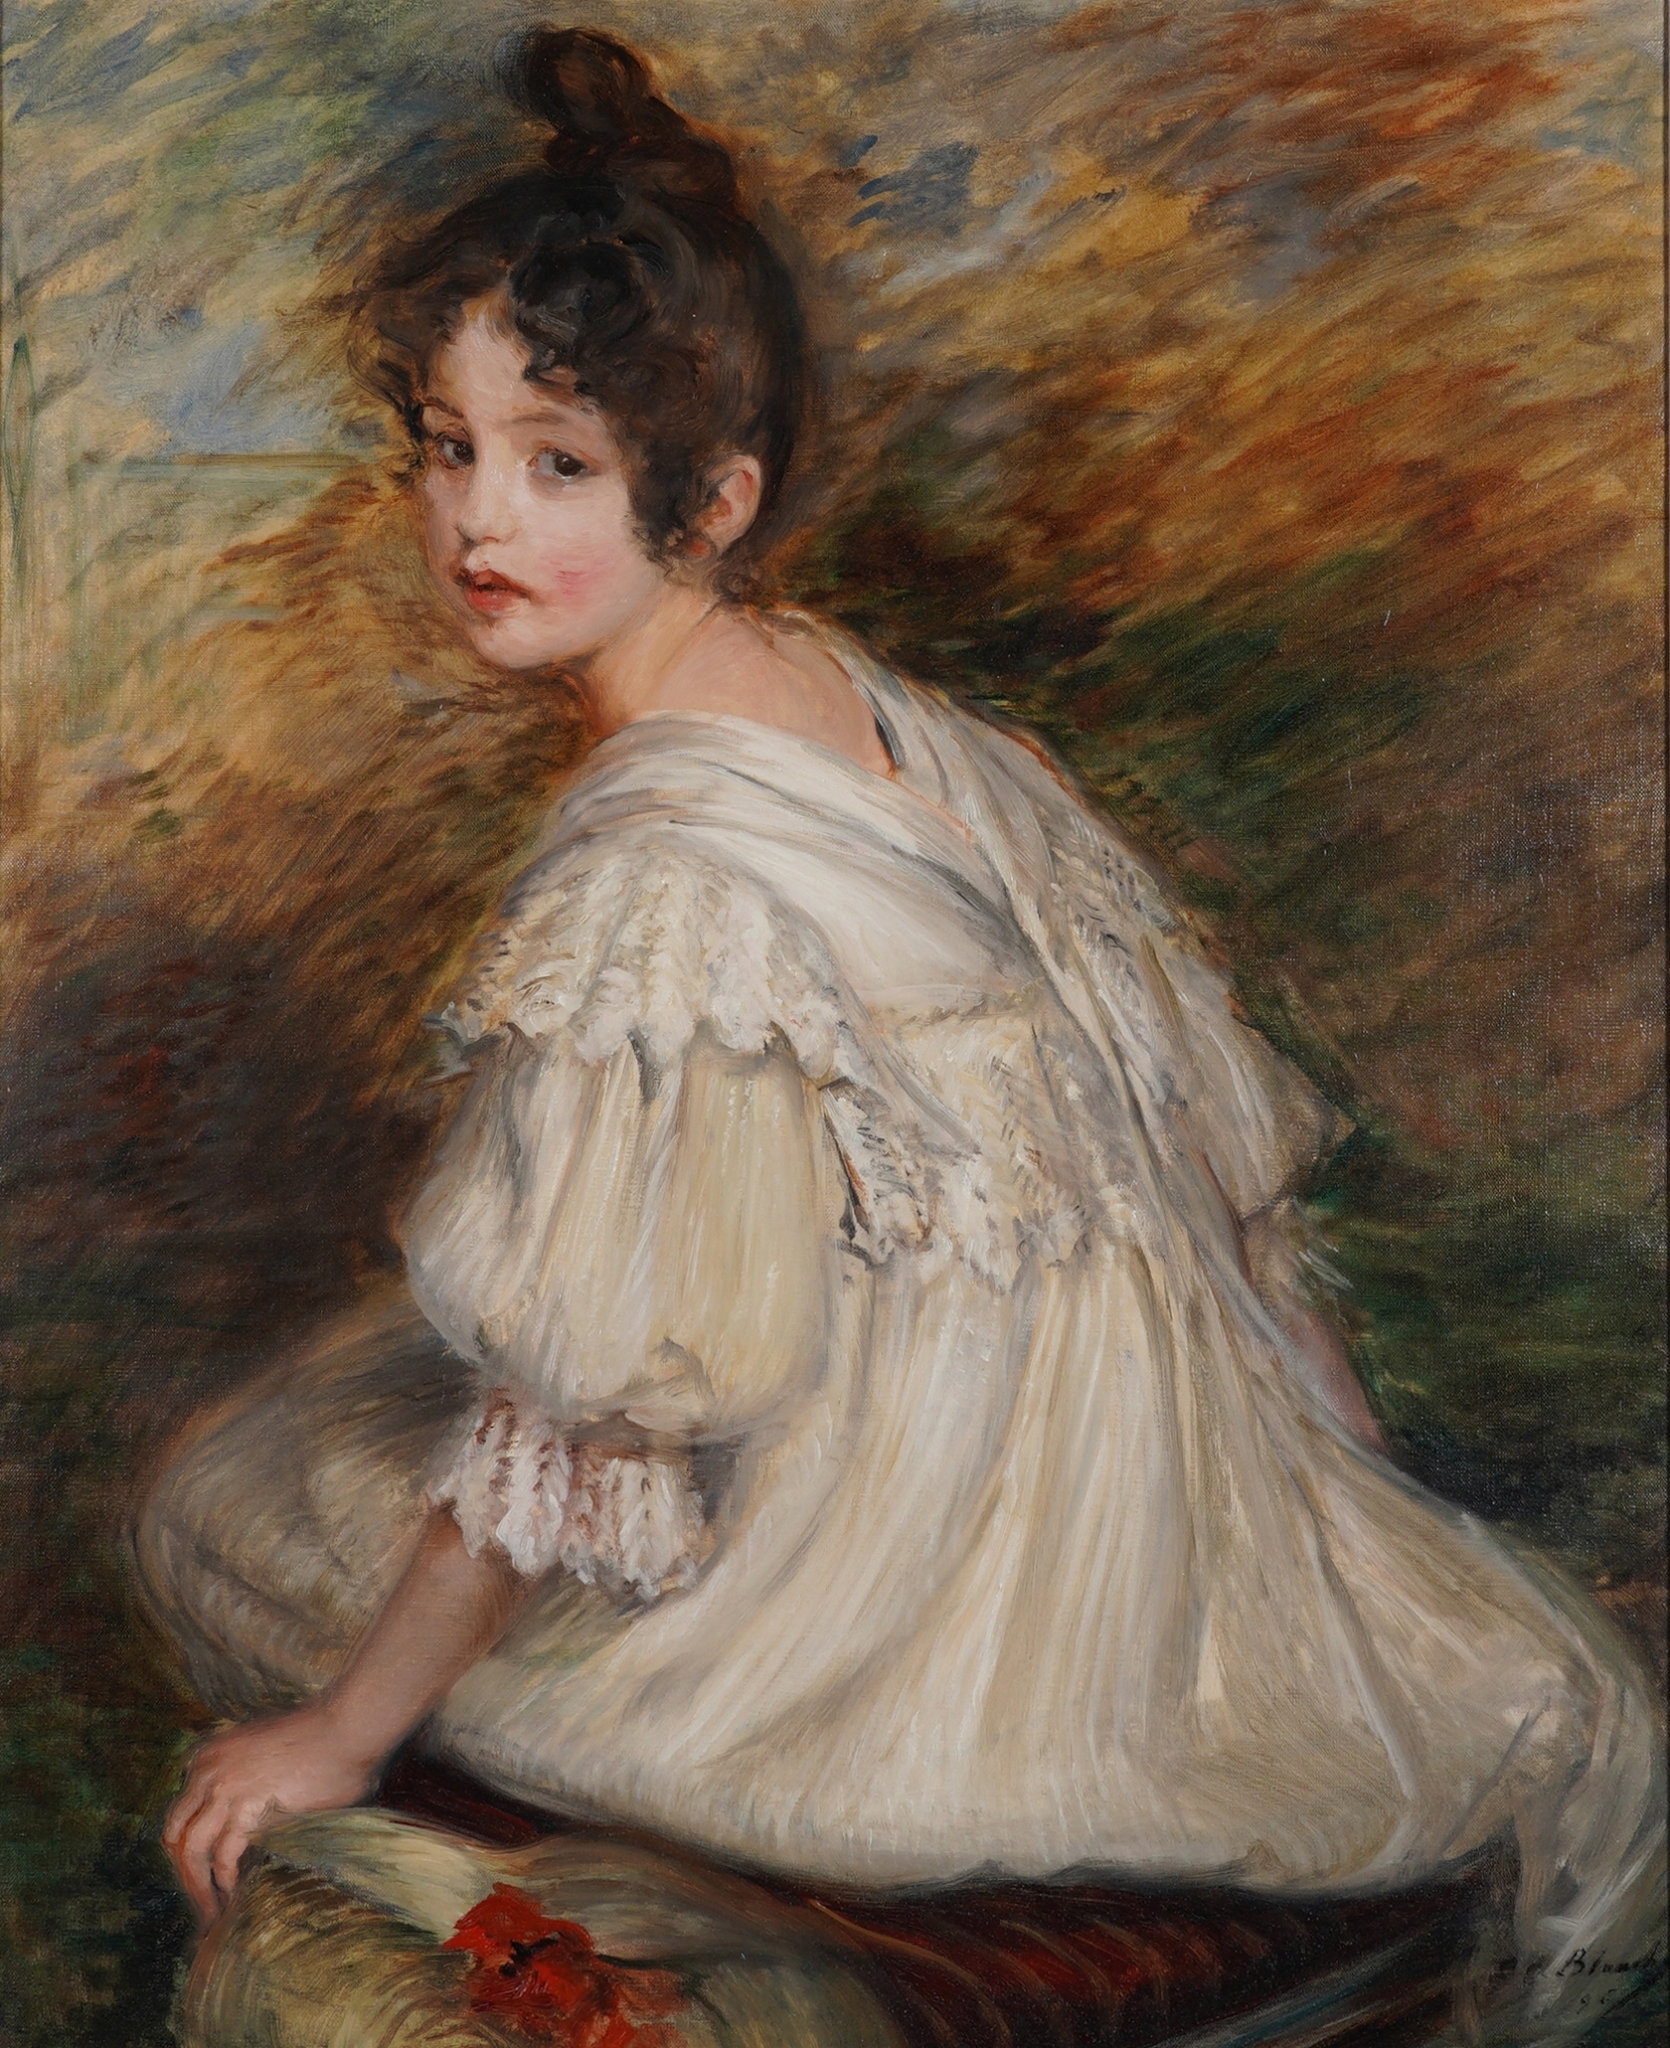 JACQUES-ÉMILE BLANCHE (FRENCH, 1861-1942) Jeune fille à la robe blanche signed and dated 'J E Blanche 96' (lower right) oil on canvas 74 x 60cm £7000-10,000